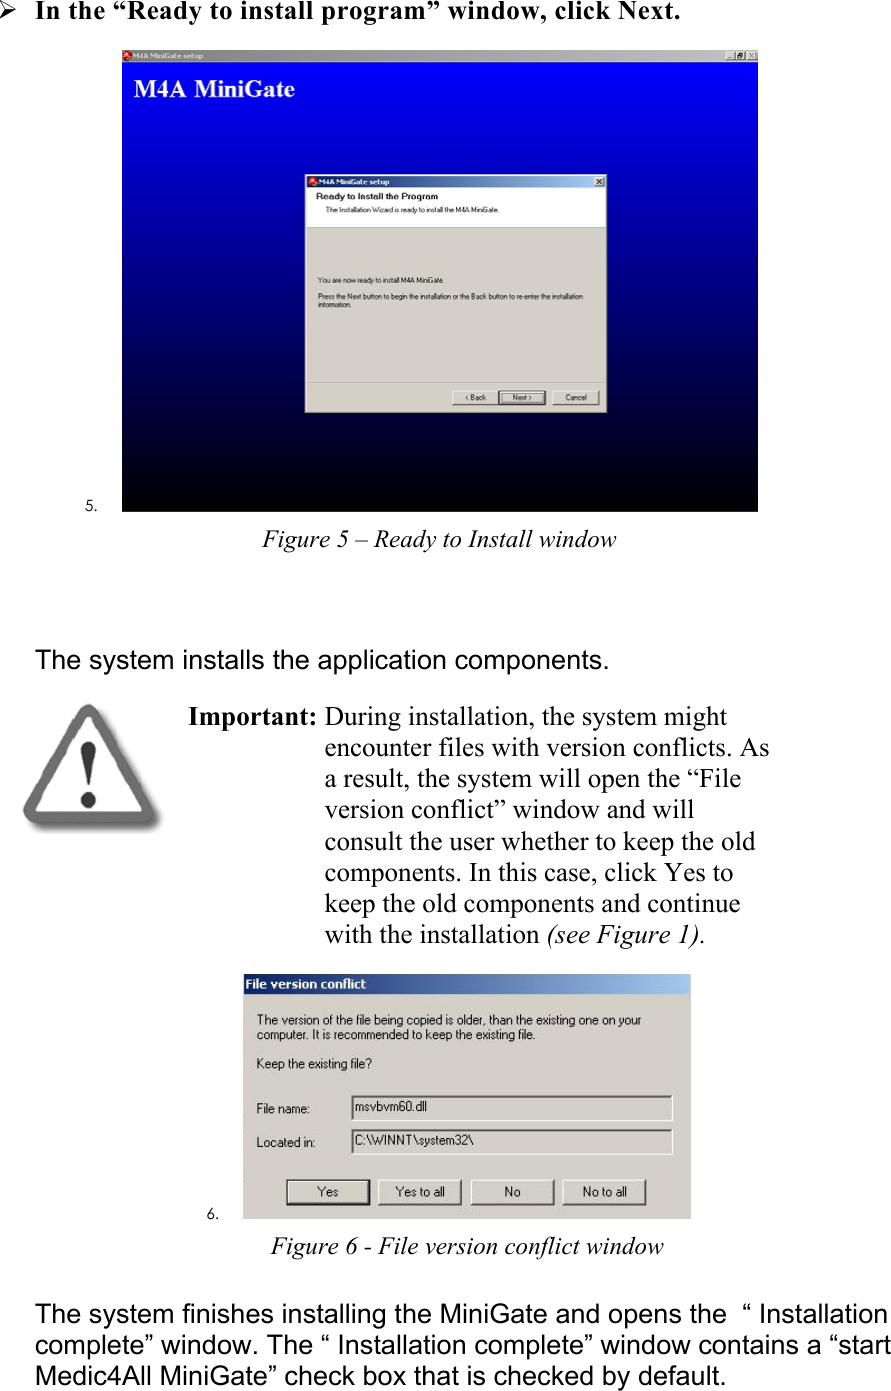 ¾ In the “Ready to install program” window, click Next. 5.  Figure 5 – Ready to Install window  The system installs the application components.  Important: During installation, the system might encounter files with version conflicts. As a result, the system will open the “File version conflict” window and will consult the user whether to keep the old components. In this case, click Yes to keep the old components and continue with the installation (see Figure 1).  6.  Figure 6 - File version conflict window The system finishes installing the MiniGate and opens the  “ Installation complete” window. The “ Installation complete” window contains a “start Medic4All MiniGate” check box that is checked by default. 